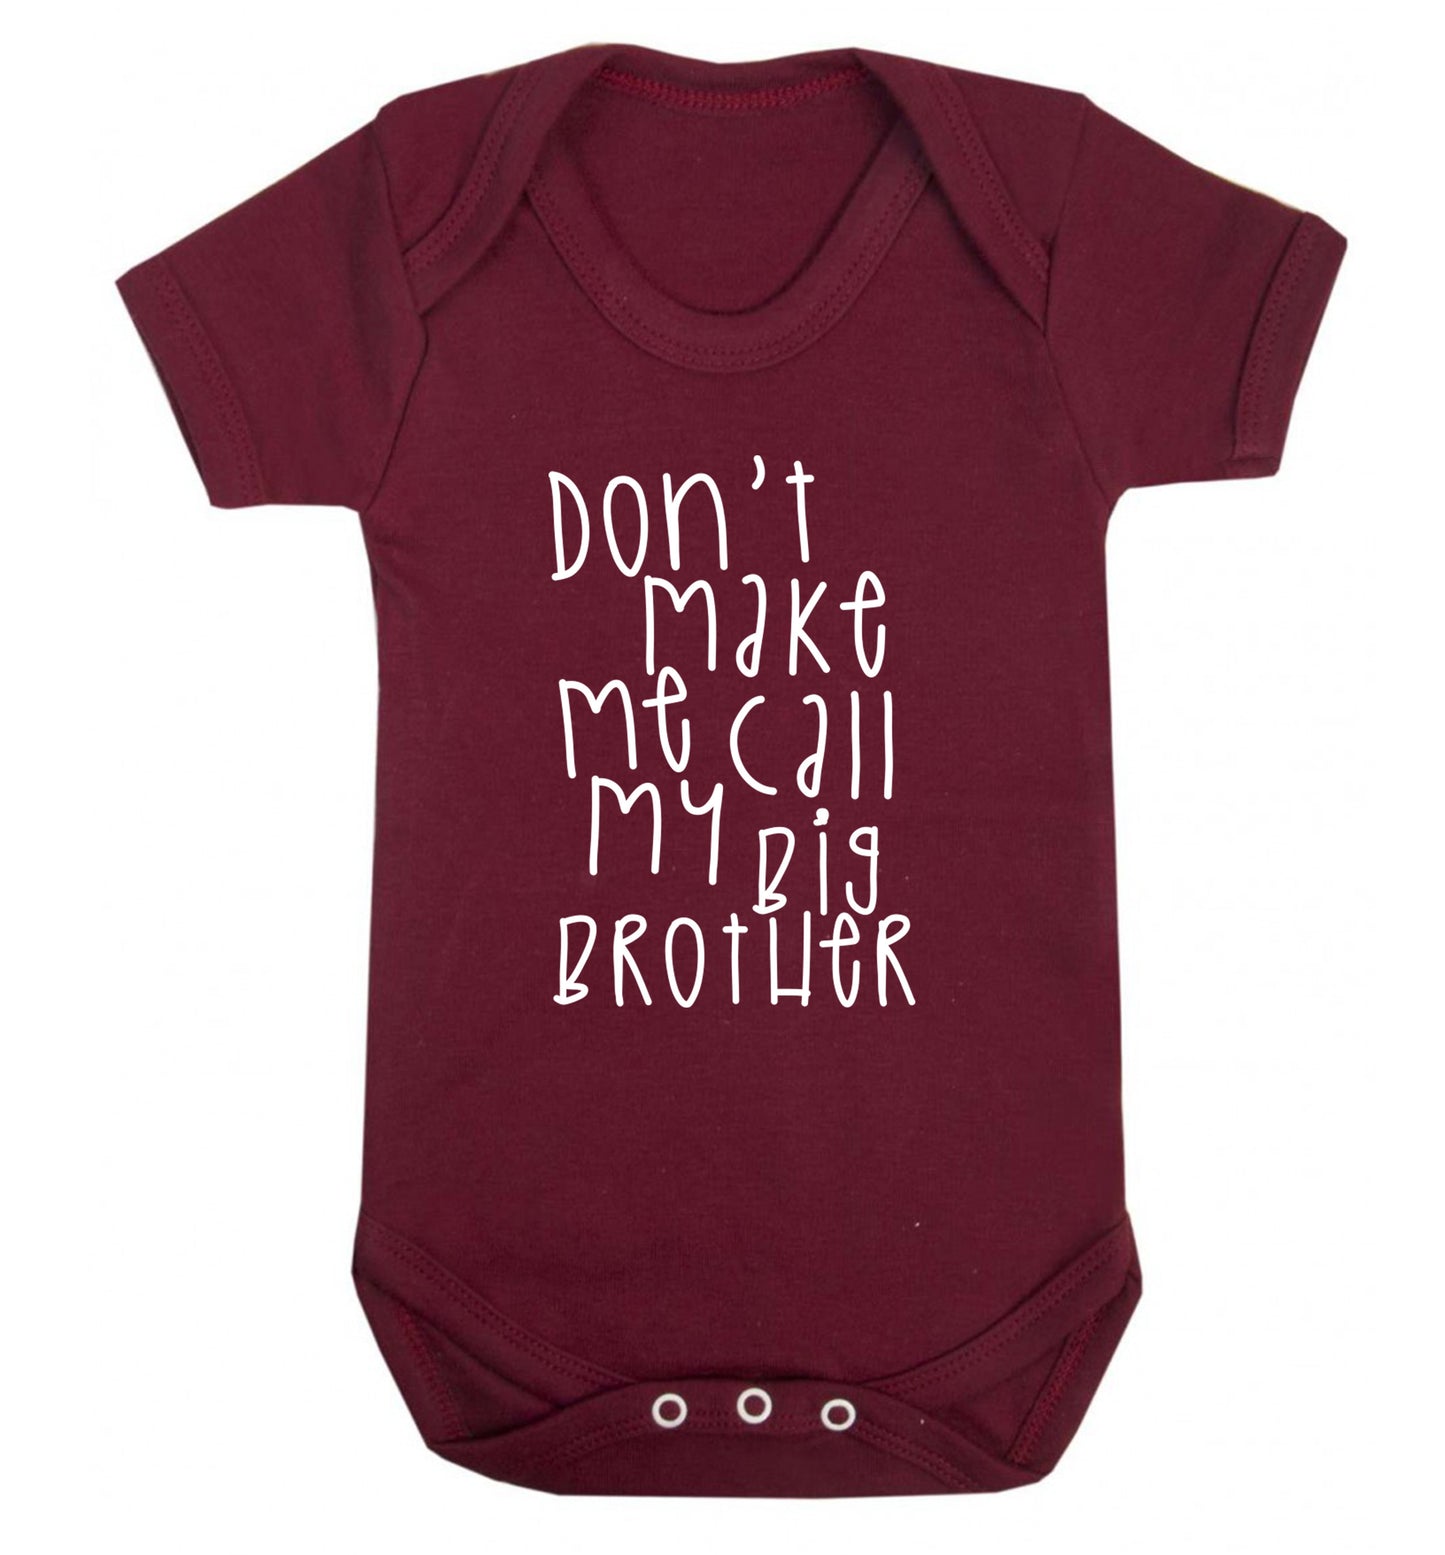 Don't make me call my big brother Baby Vest maroon 18-24 months